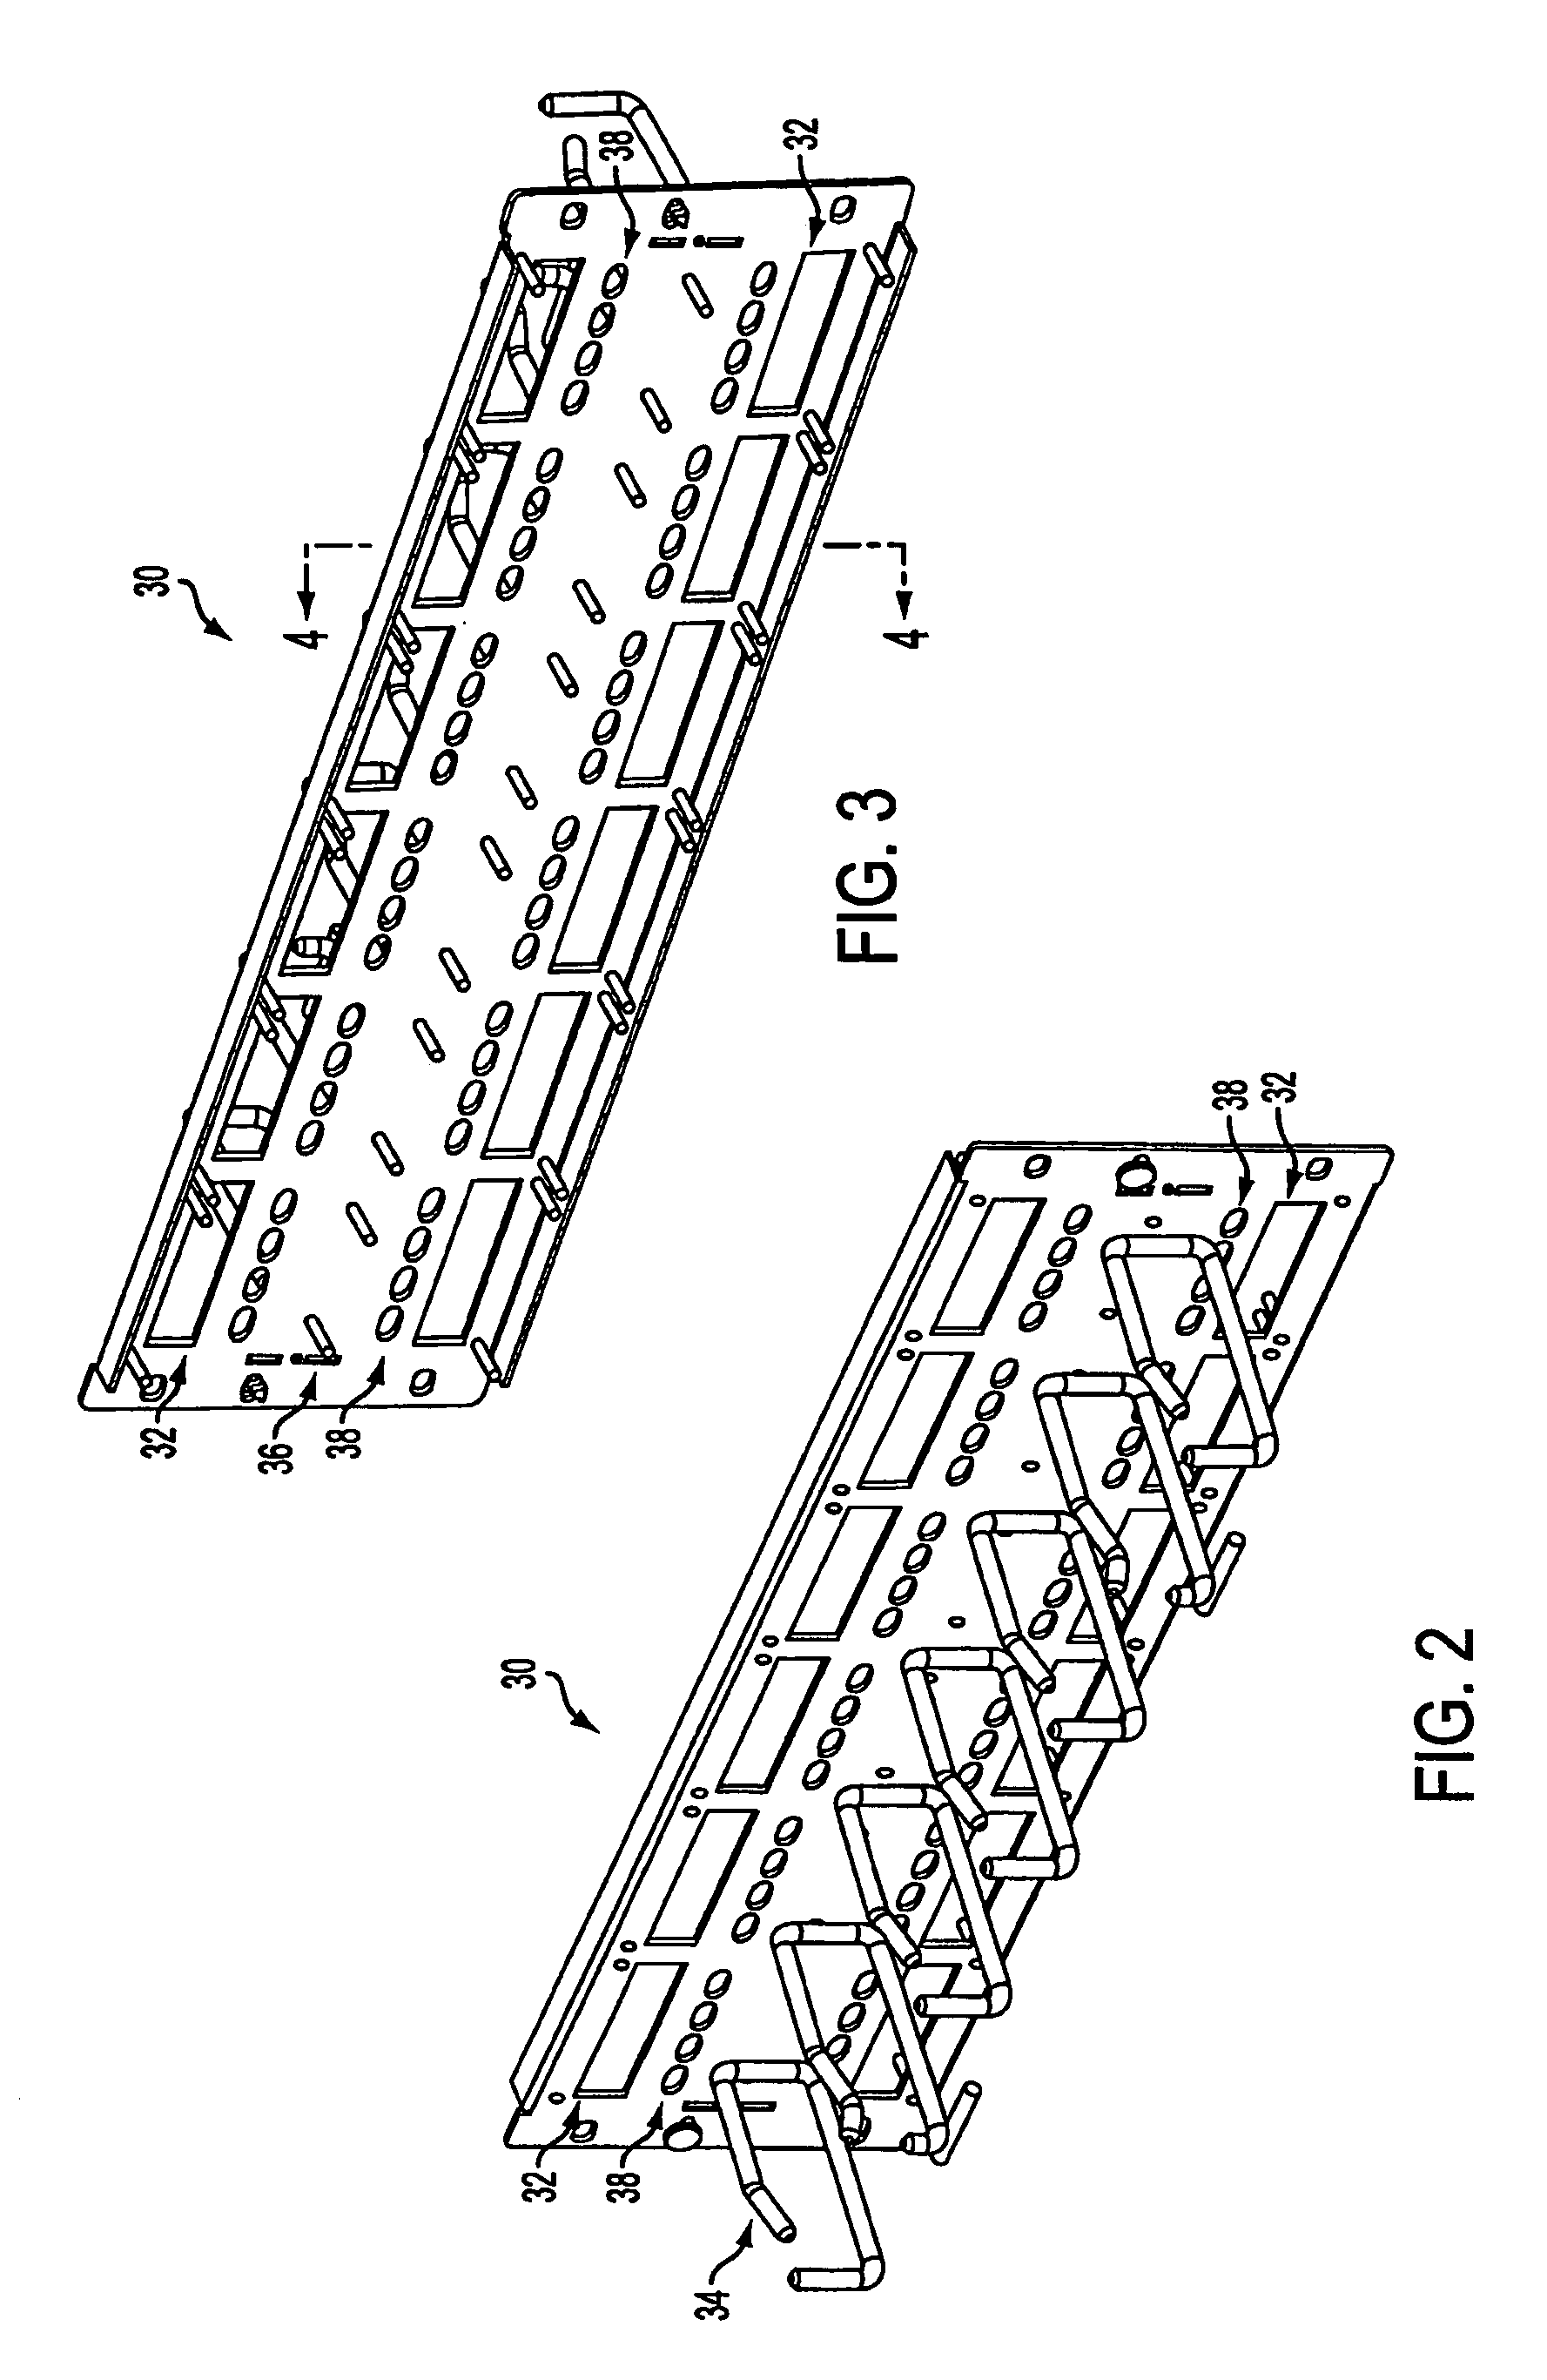 Midspan patch panel with compensation circuit for data terminal equipment, power insertion and data collection